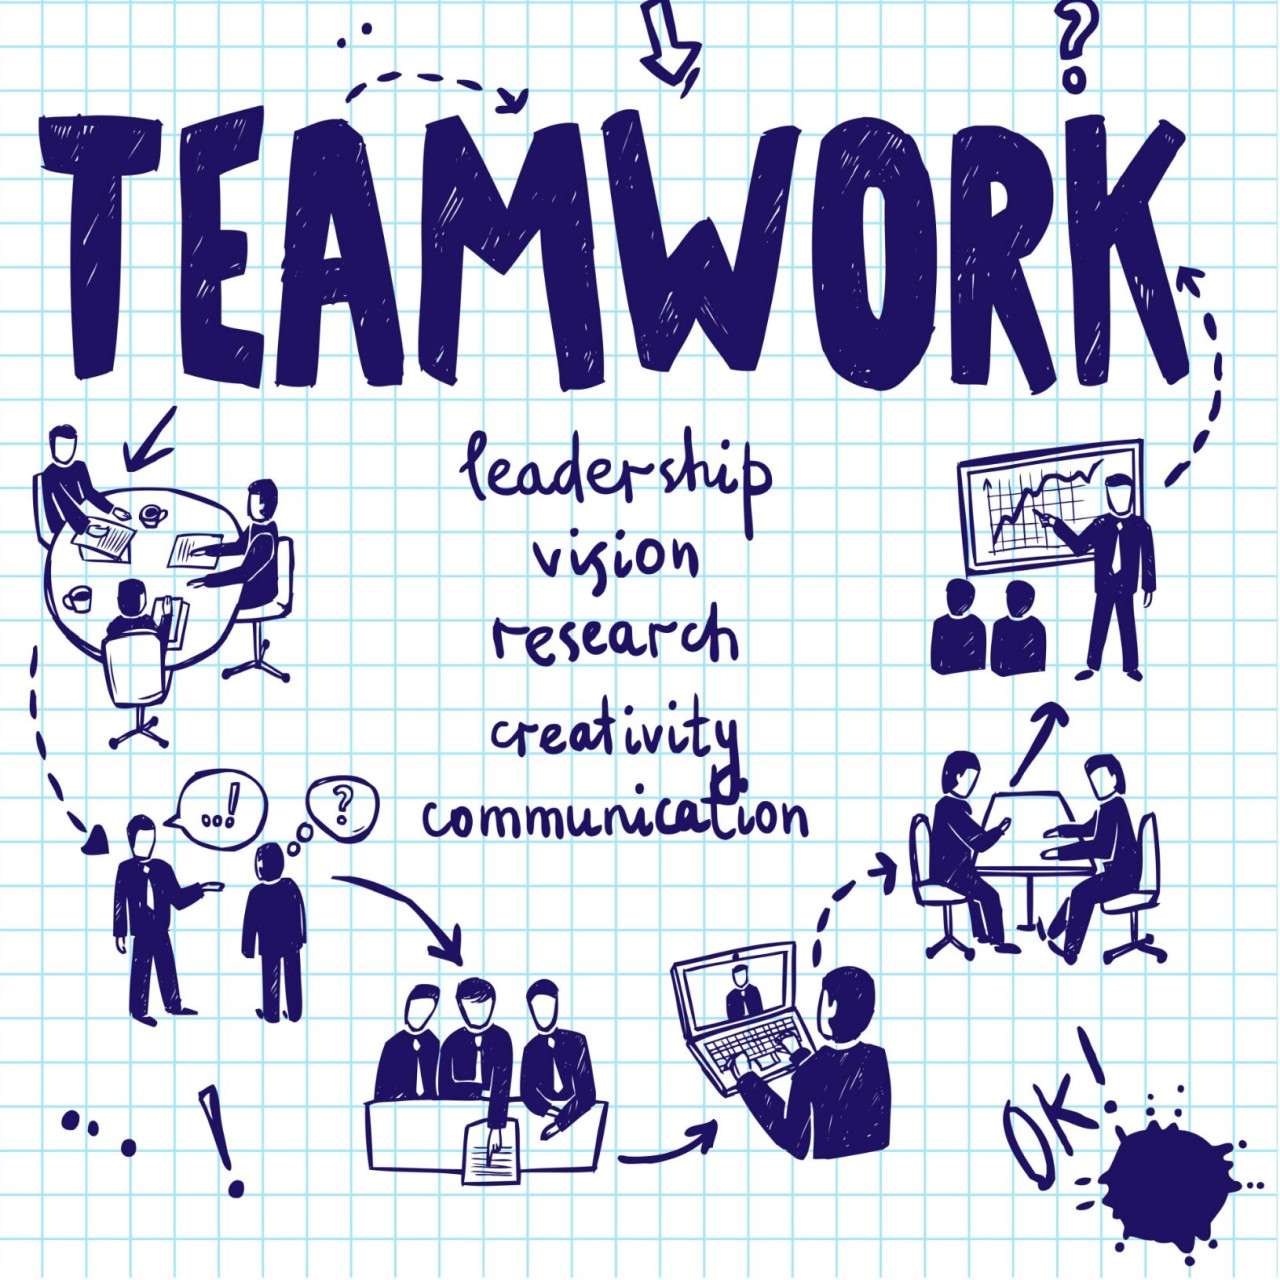 What are the Benefits of team building